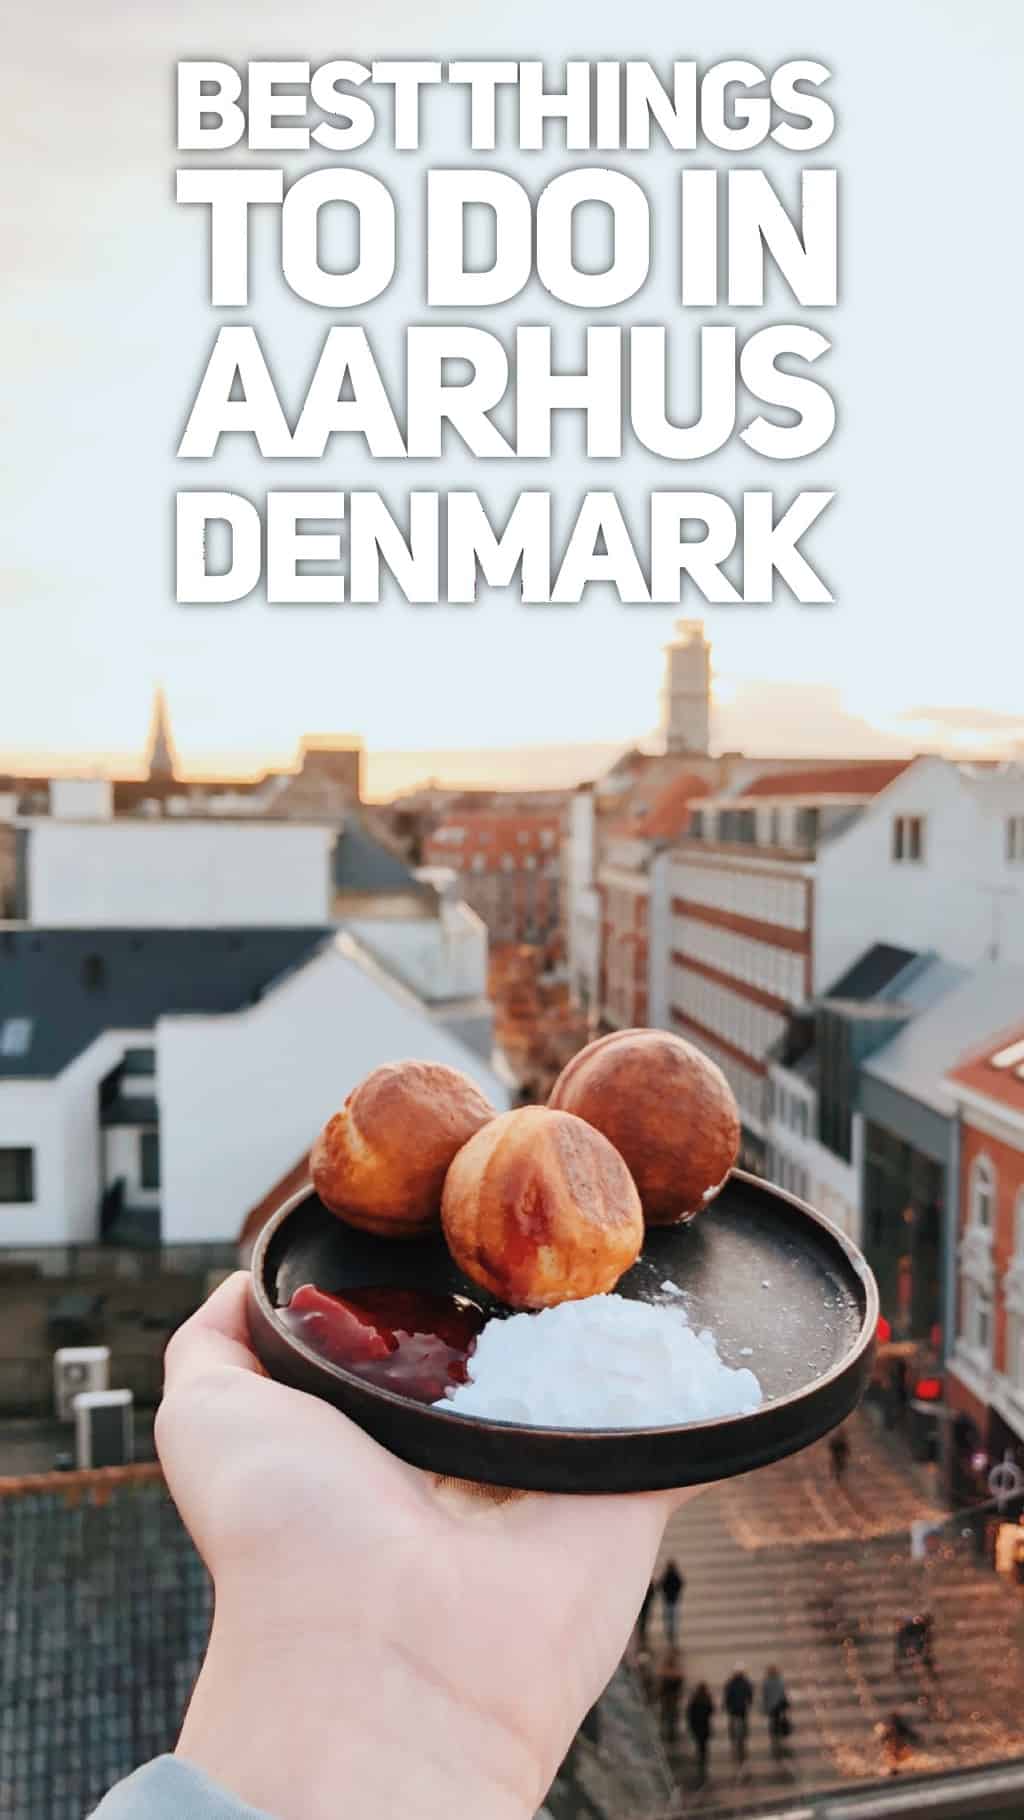 Aarhus, Denmark for a Weekend: Museums, Sea and Open Sandwiches